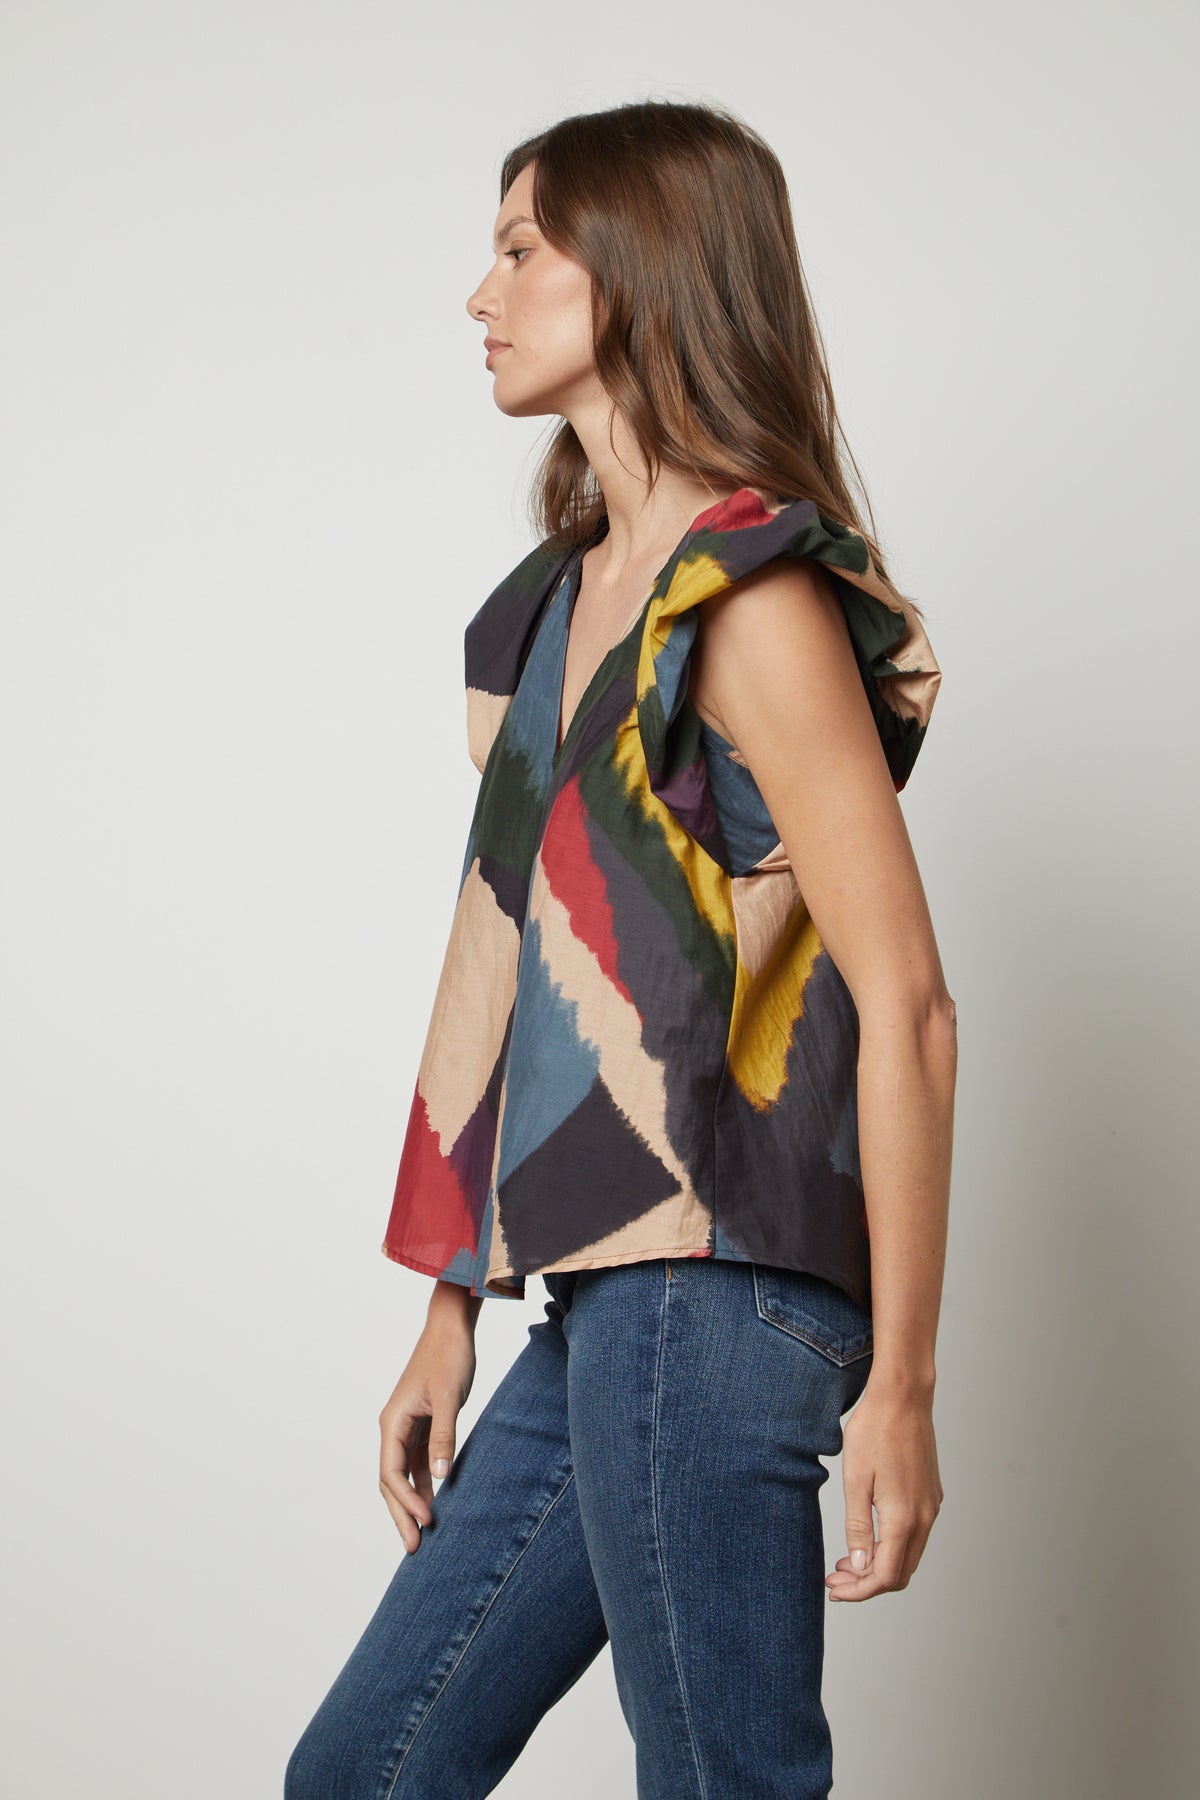   The model is wearing the Velvet by Graham & Spencer TAMARA PRINTED TOP with flutter sleeves. 